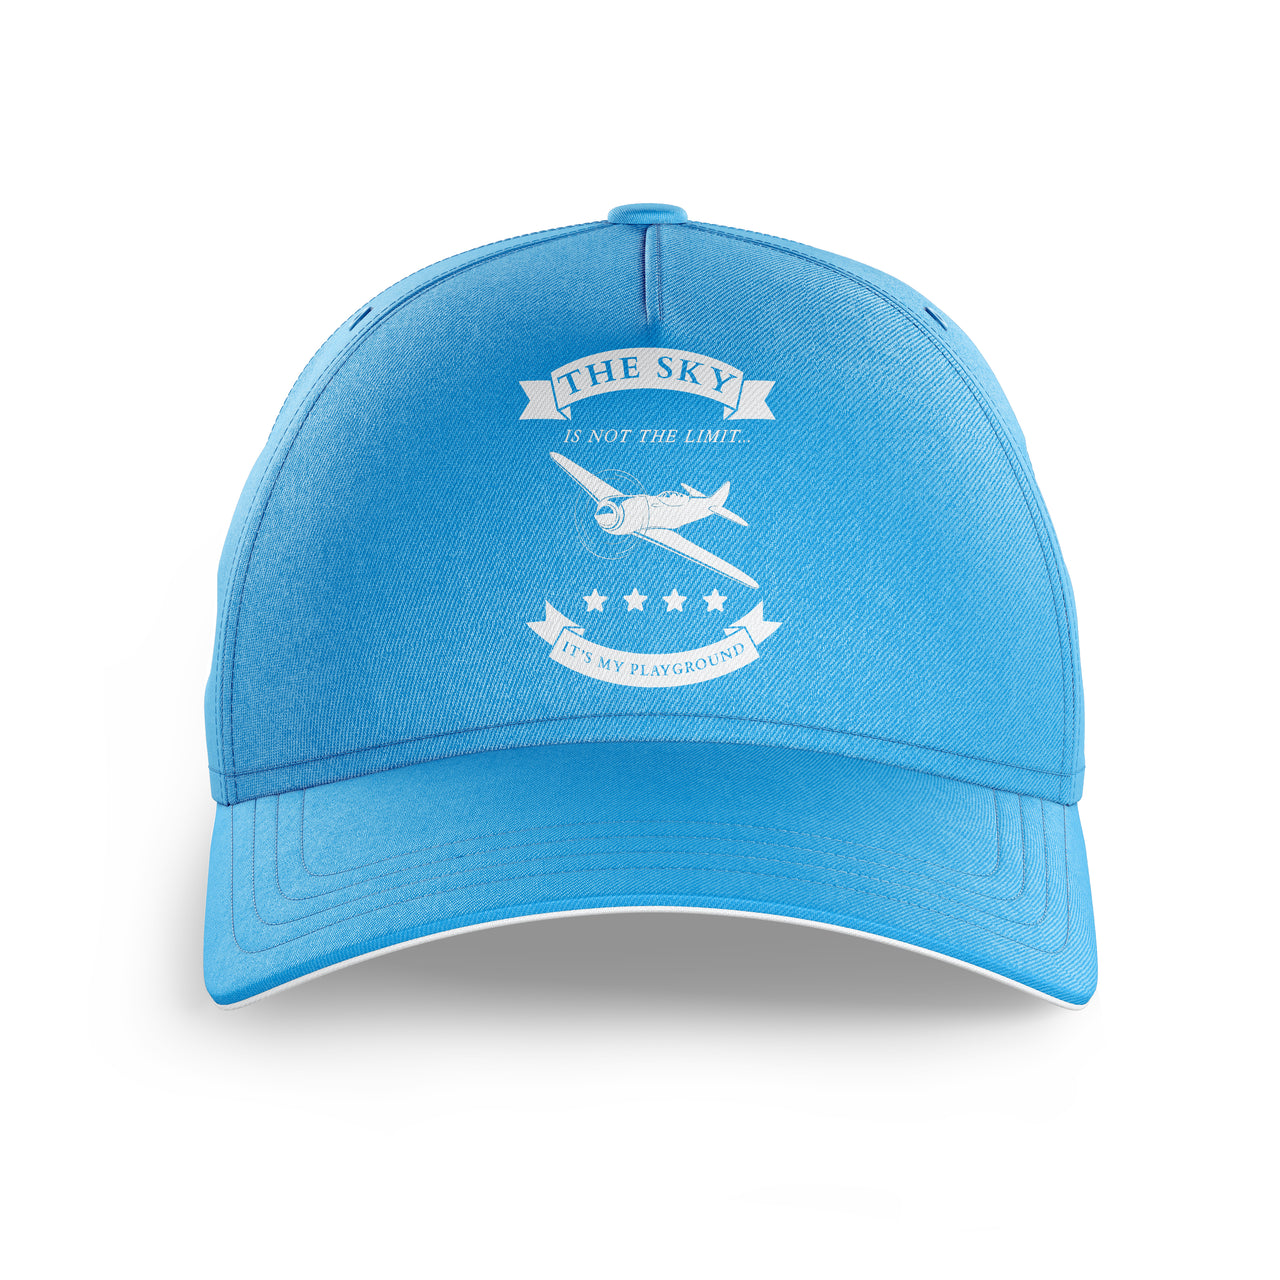 The Sky is not the limit, It's my playground Printed Hats